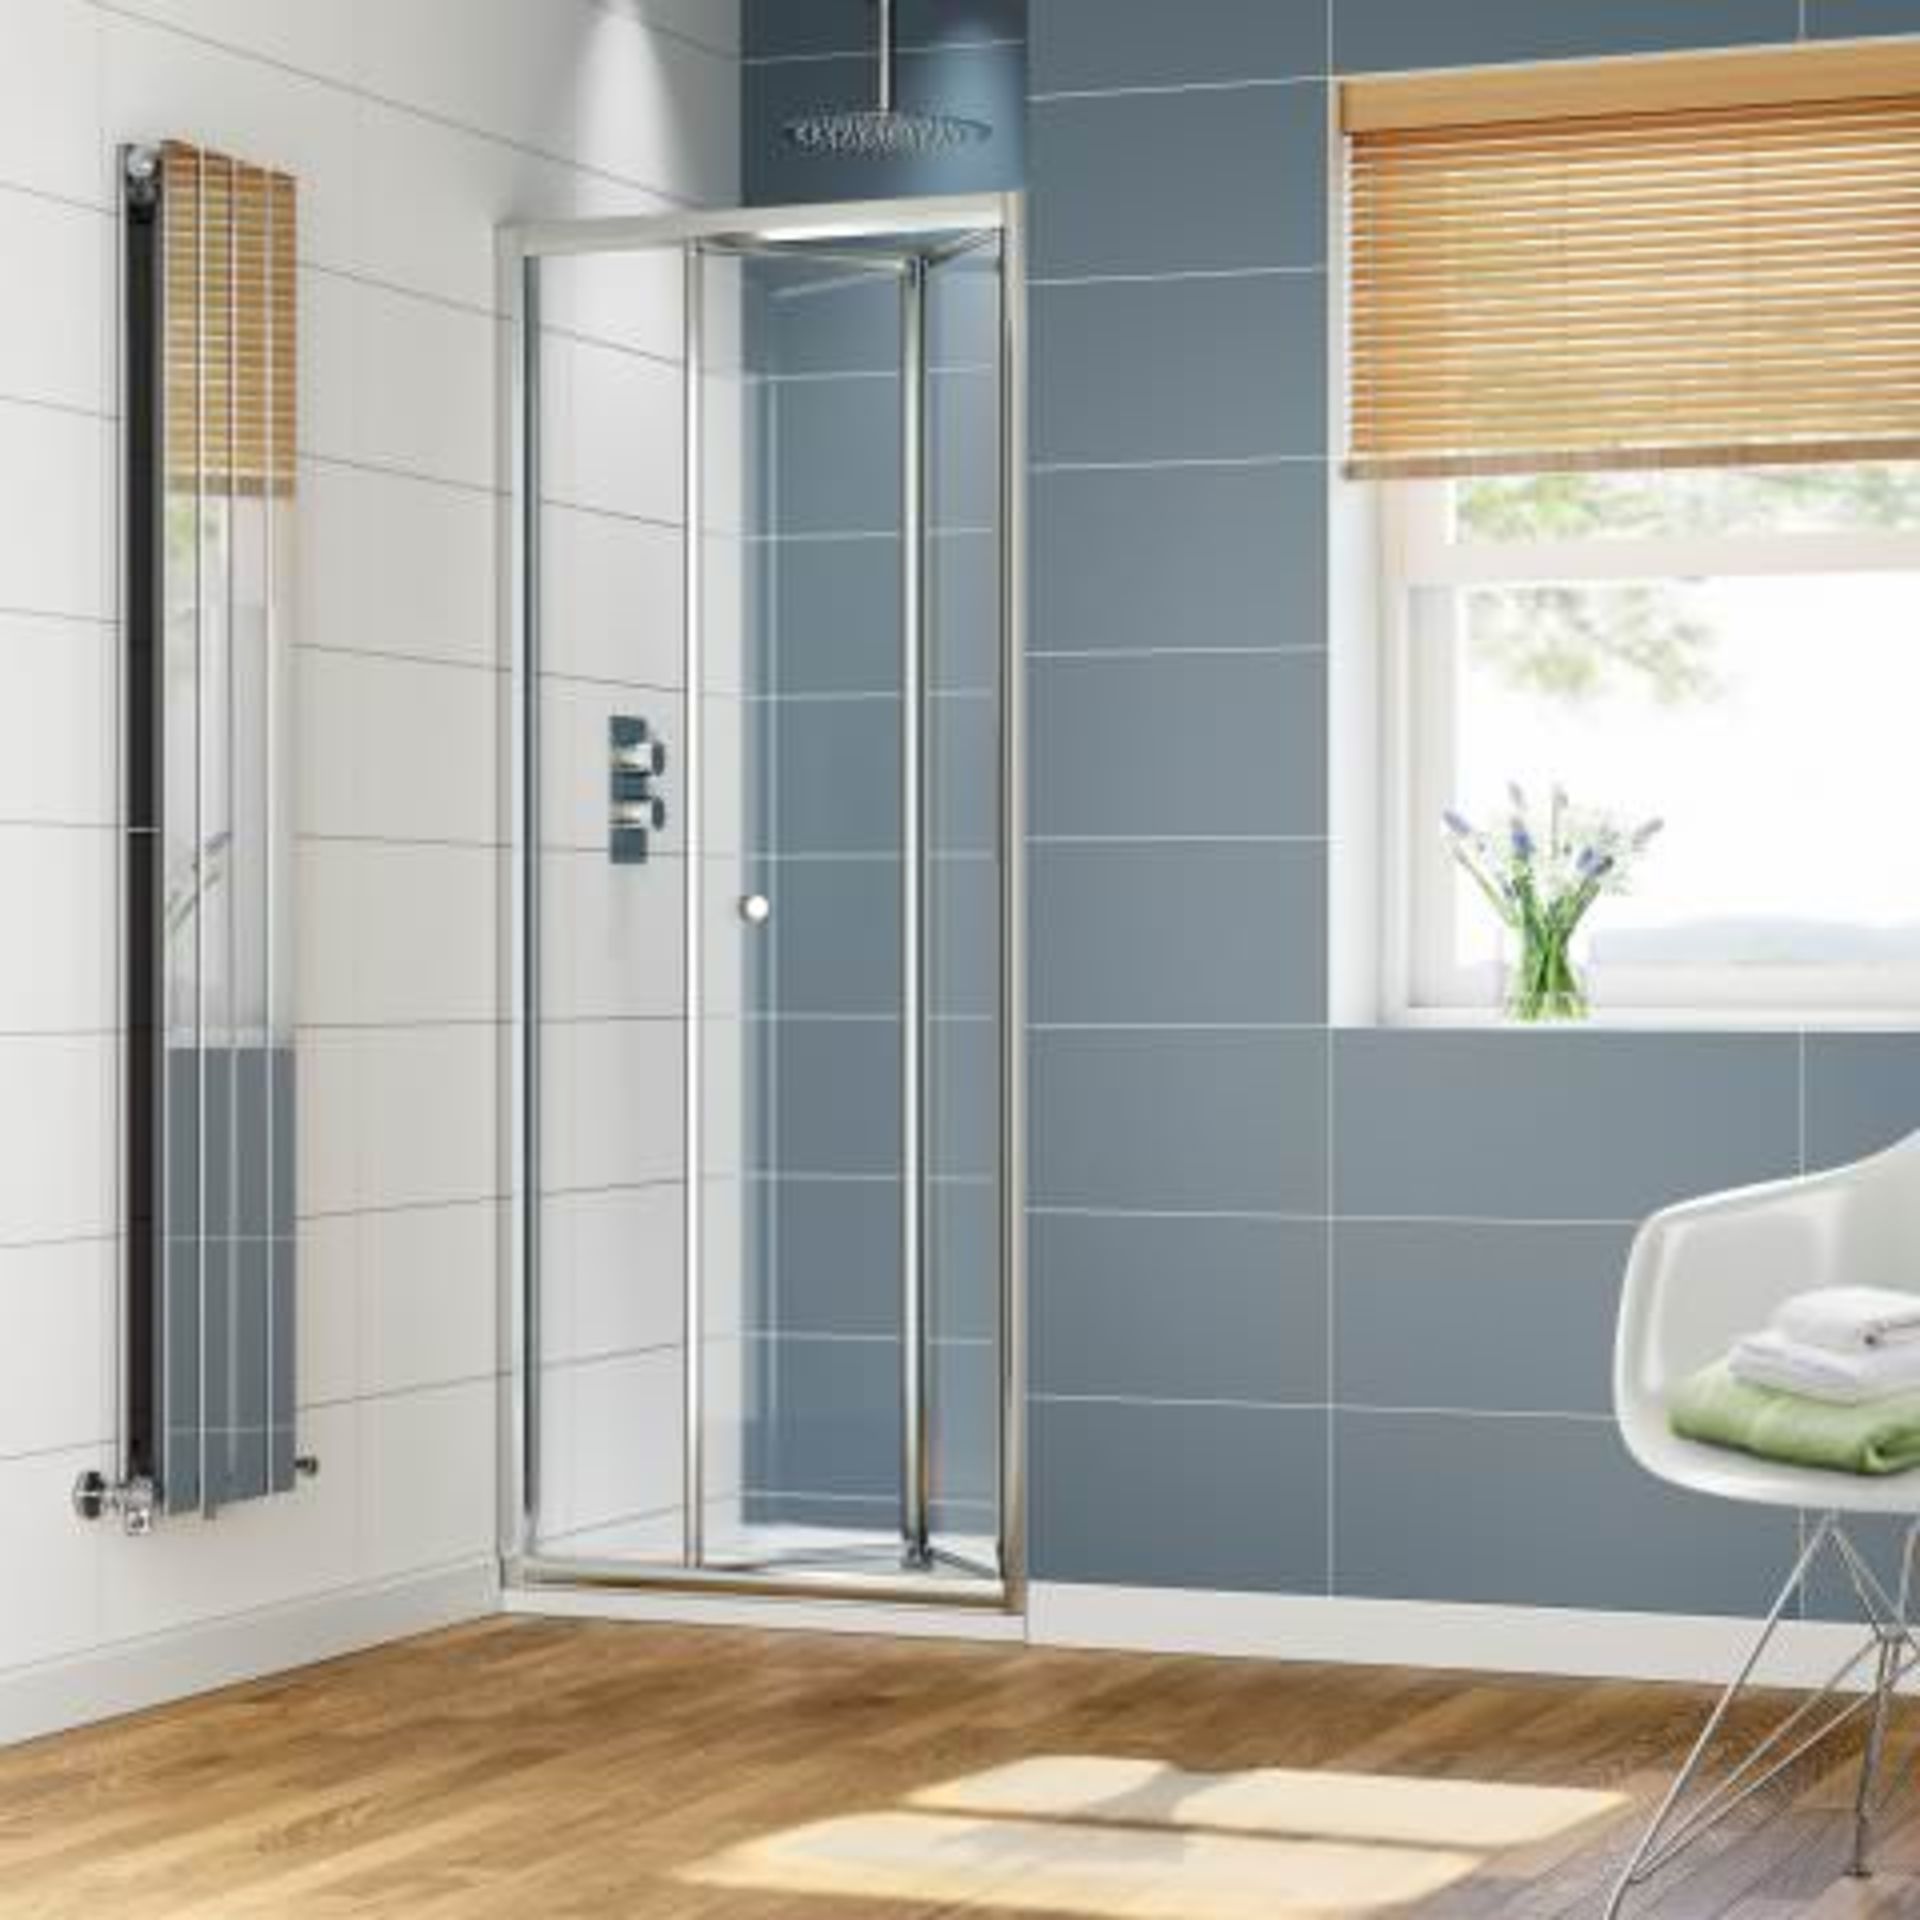 (A520) 1200mm - Elements Sliding Shower Door. RRP £299.99. Designed and crafted to improve the decor - Image 4 of 4